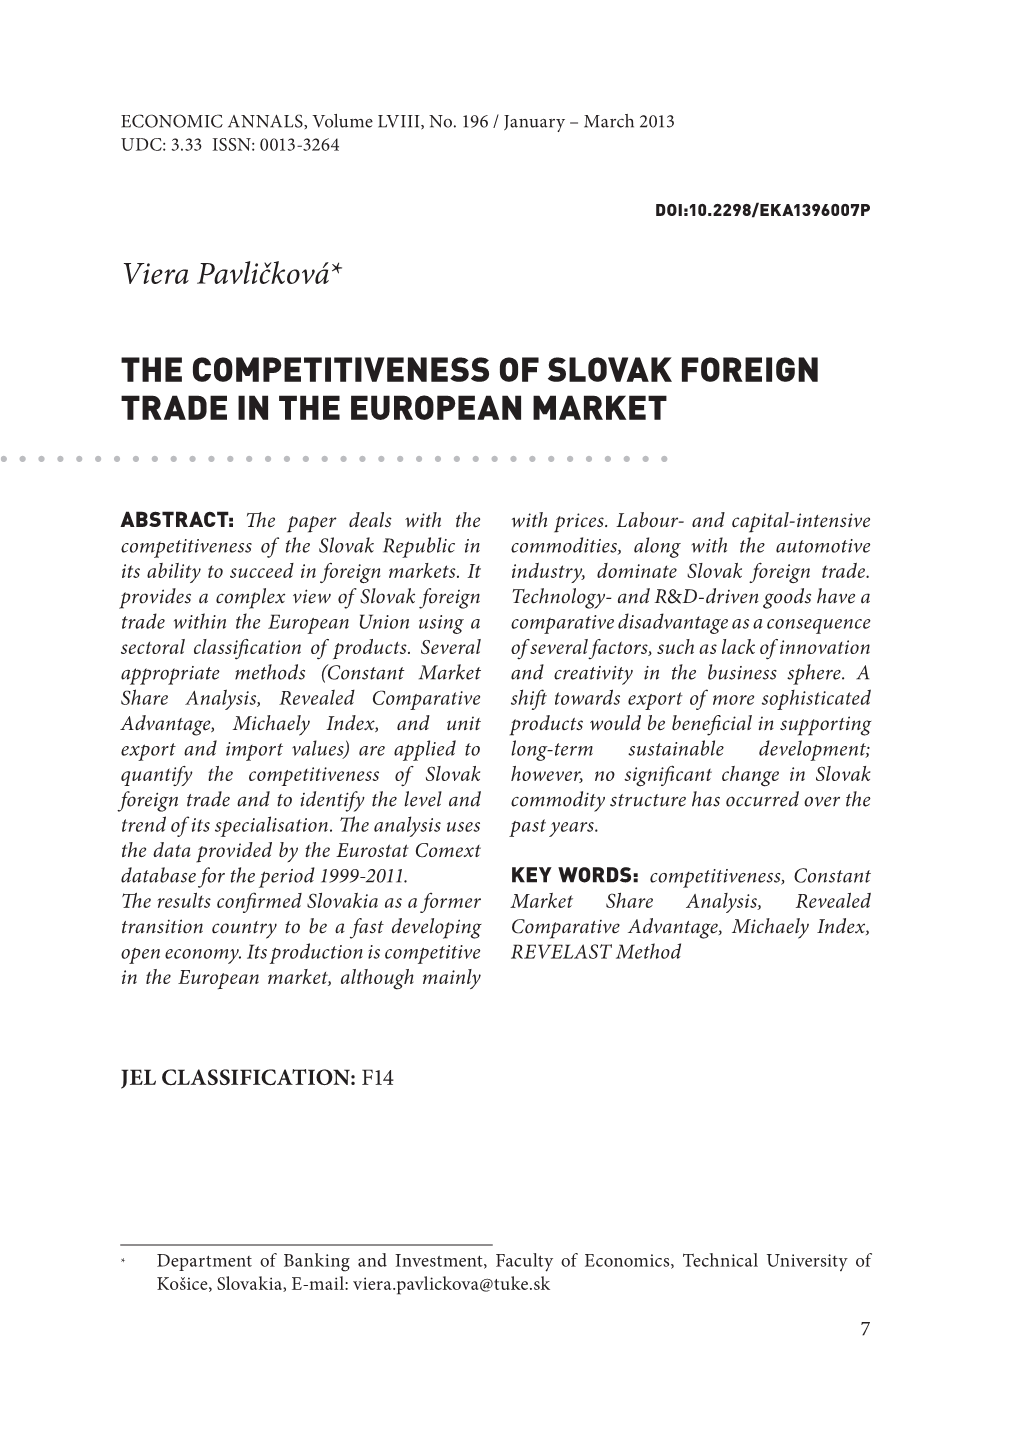 The Competitiveness of Slovak Foreign Trade in the European Market